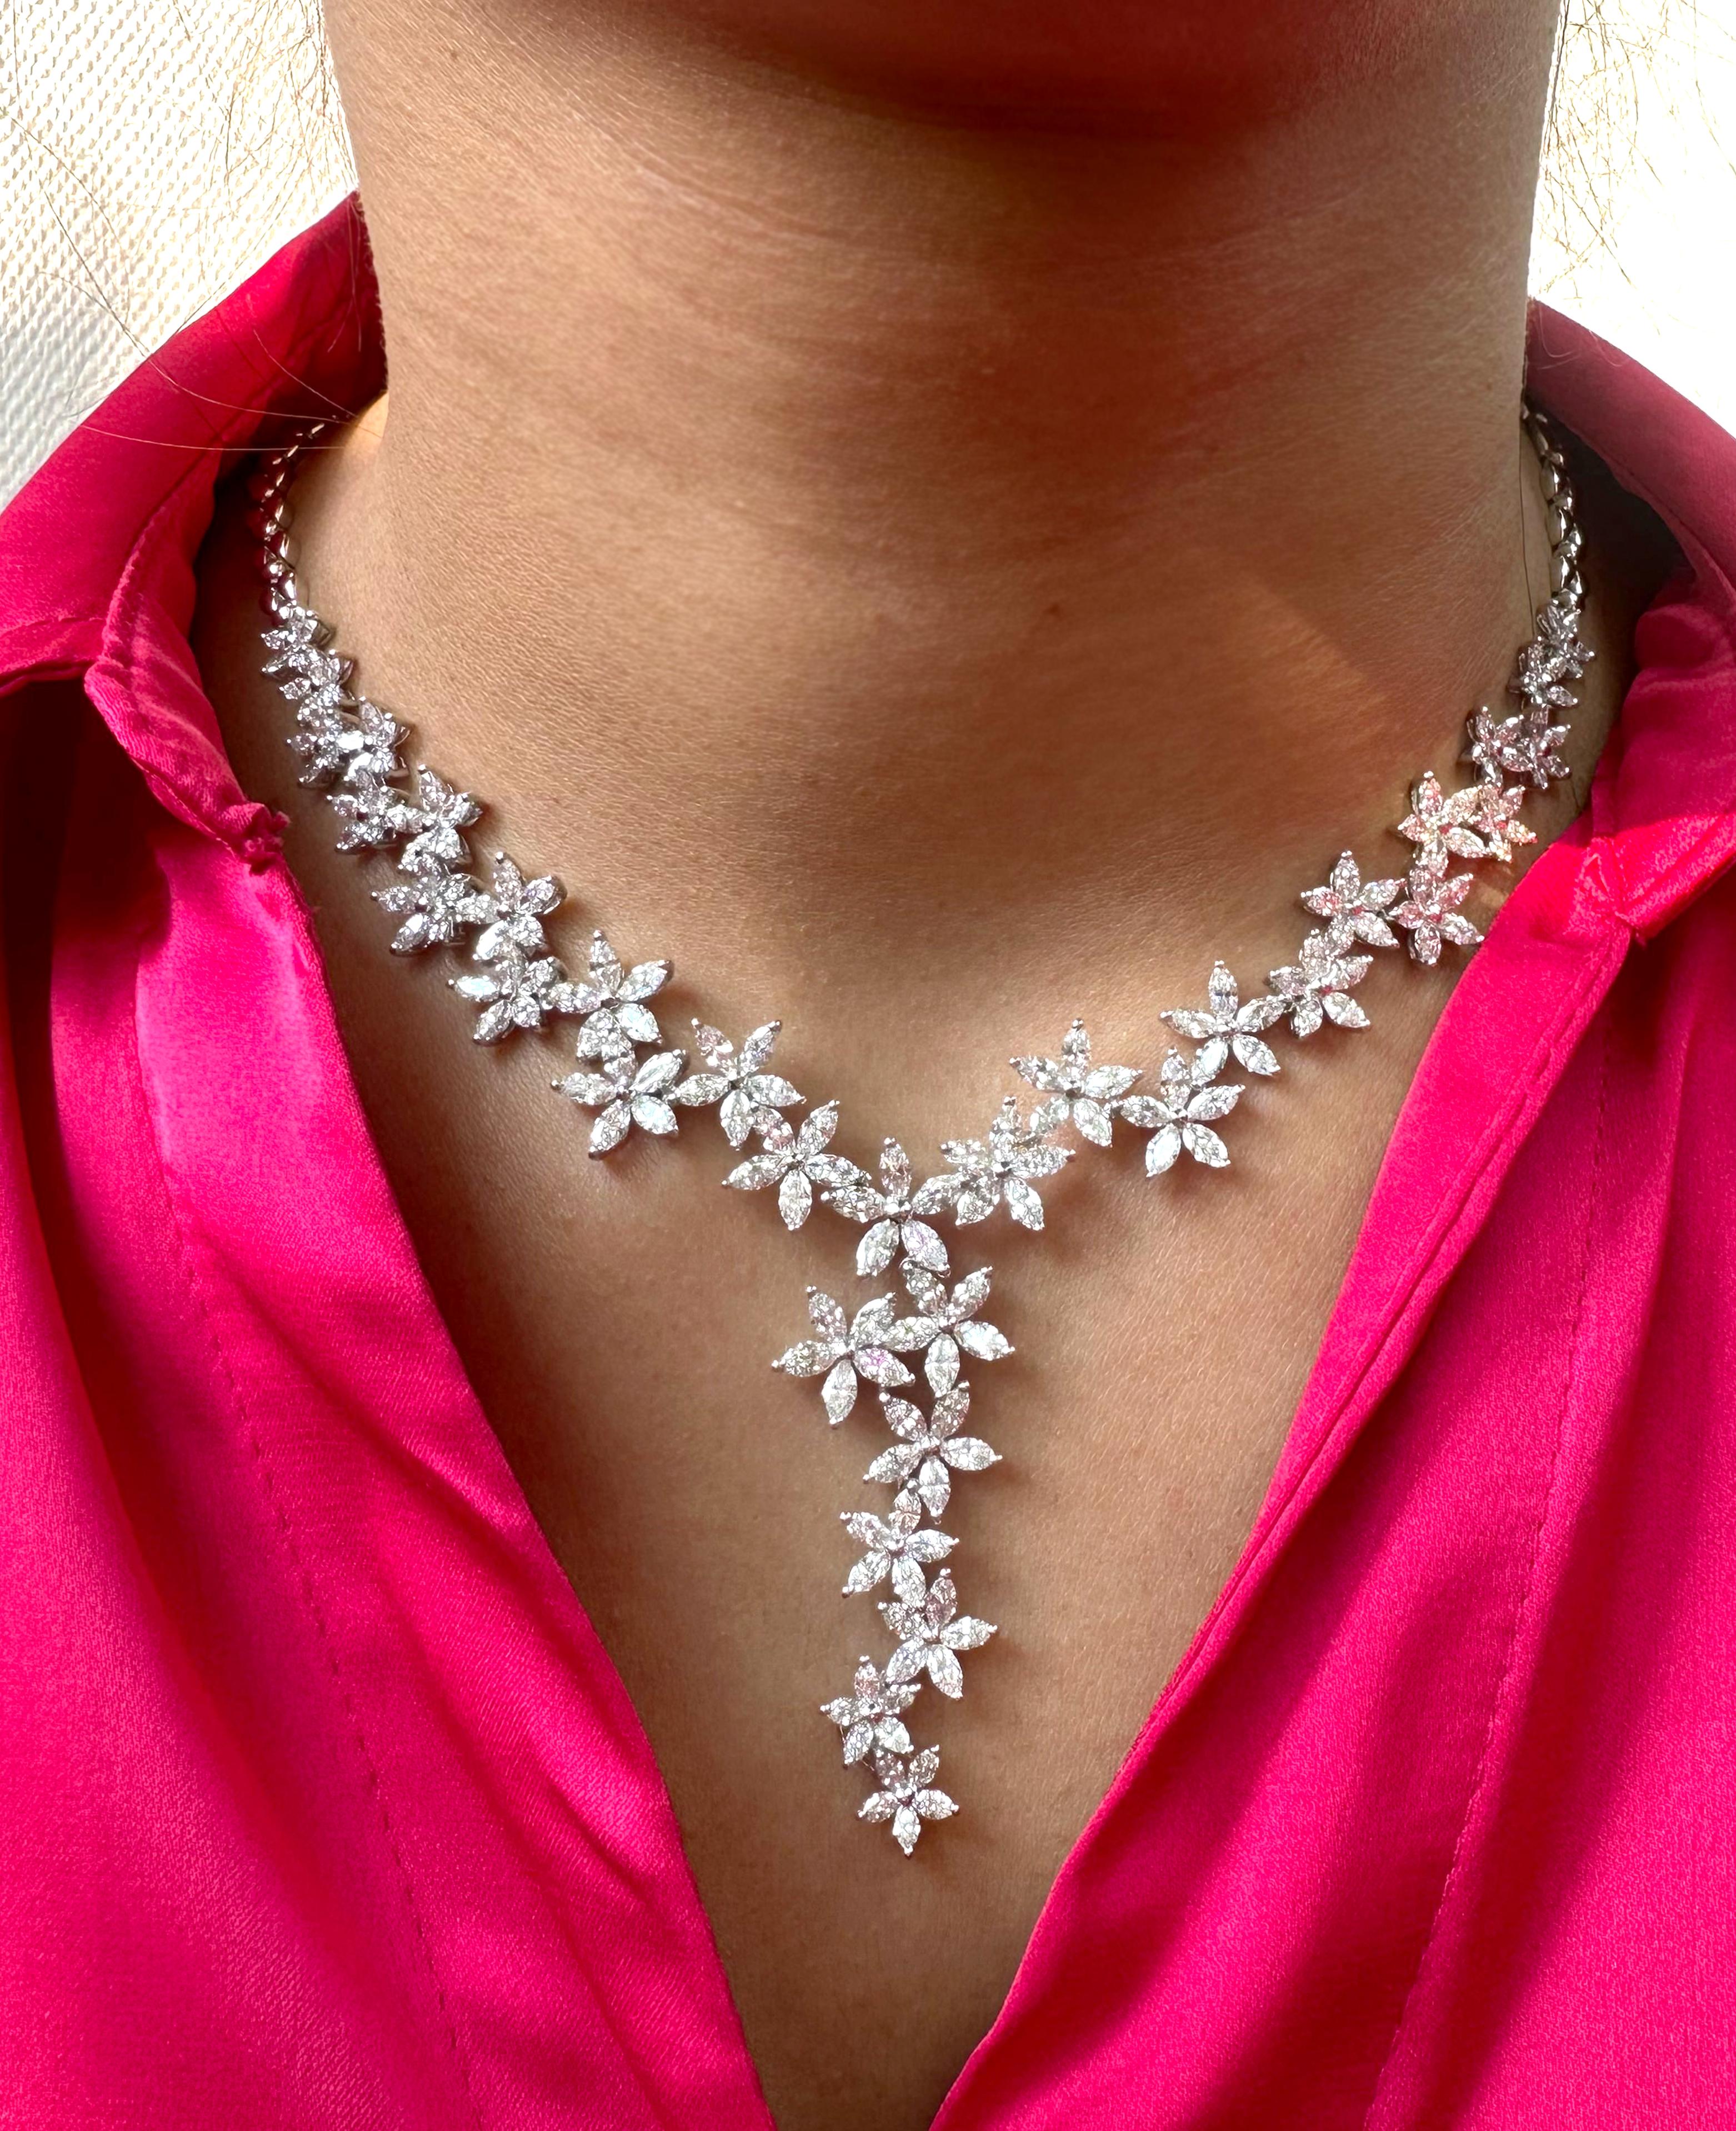 Women's One of a kind floral diamond necklace made with marquise VS-SI natural diamonds For Sale